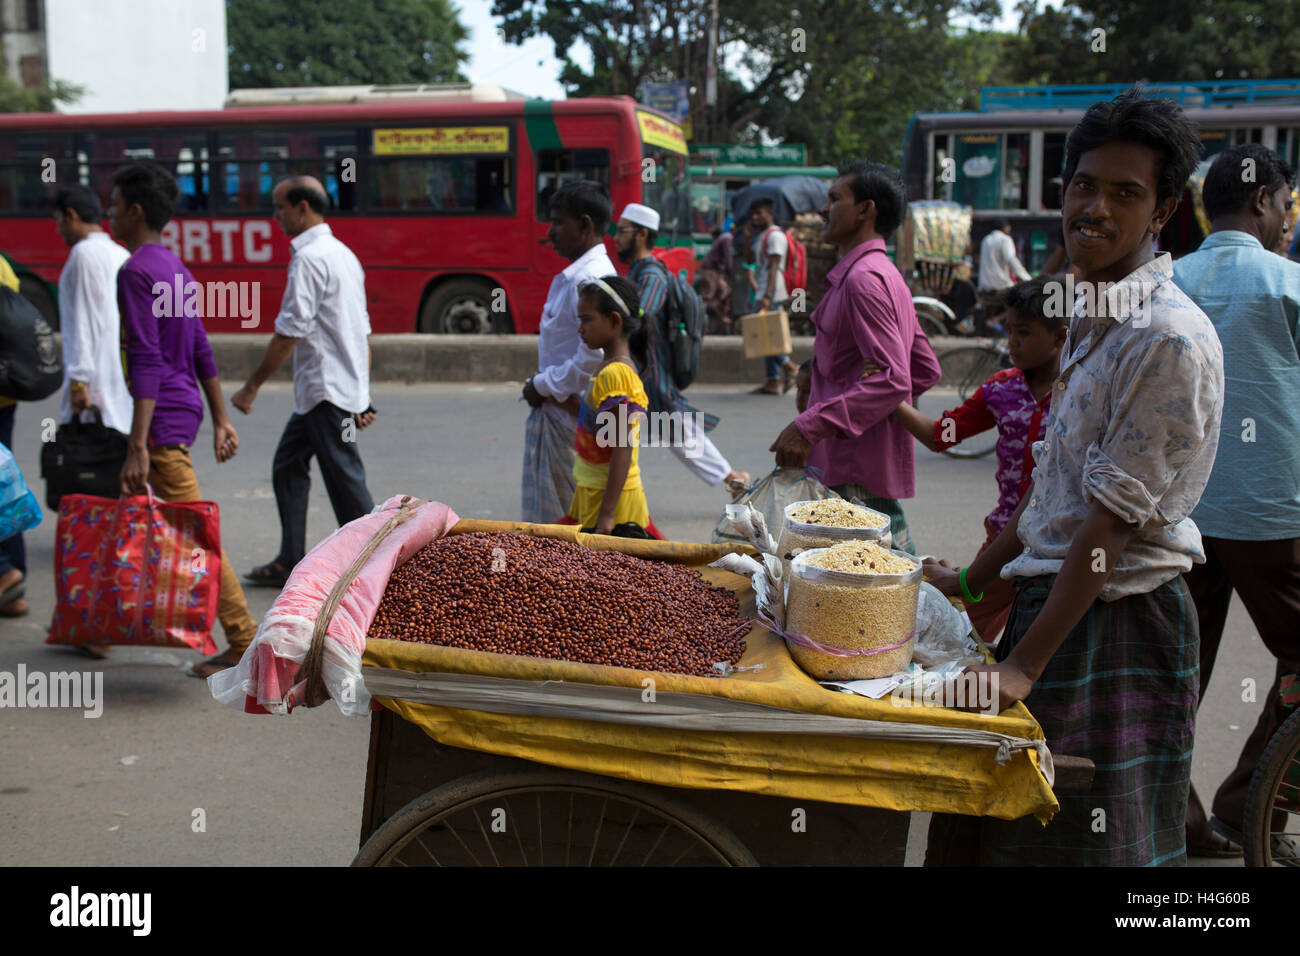 DHAKA, BANGLADESH - OCTOBER 15 : A vendor sell food on street in Dhaka, Bangladesh, on October 15, 2016. Most of time food are being prepared with unhygienic handling. And those food are being sold in open air in a dirty city, which carry many germs. Unhygienic food items that are being sold on the streets of the capital are exposing the consumers to serious health hazards. Thousands of people are taking these foods everyday attracted by their cheap price and fine taste, not knowing what a great danger they are inviting for themselves by eating them.  Some 600 million people fall ill each year Stock Photo